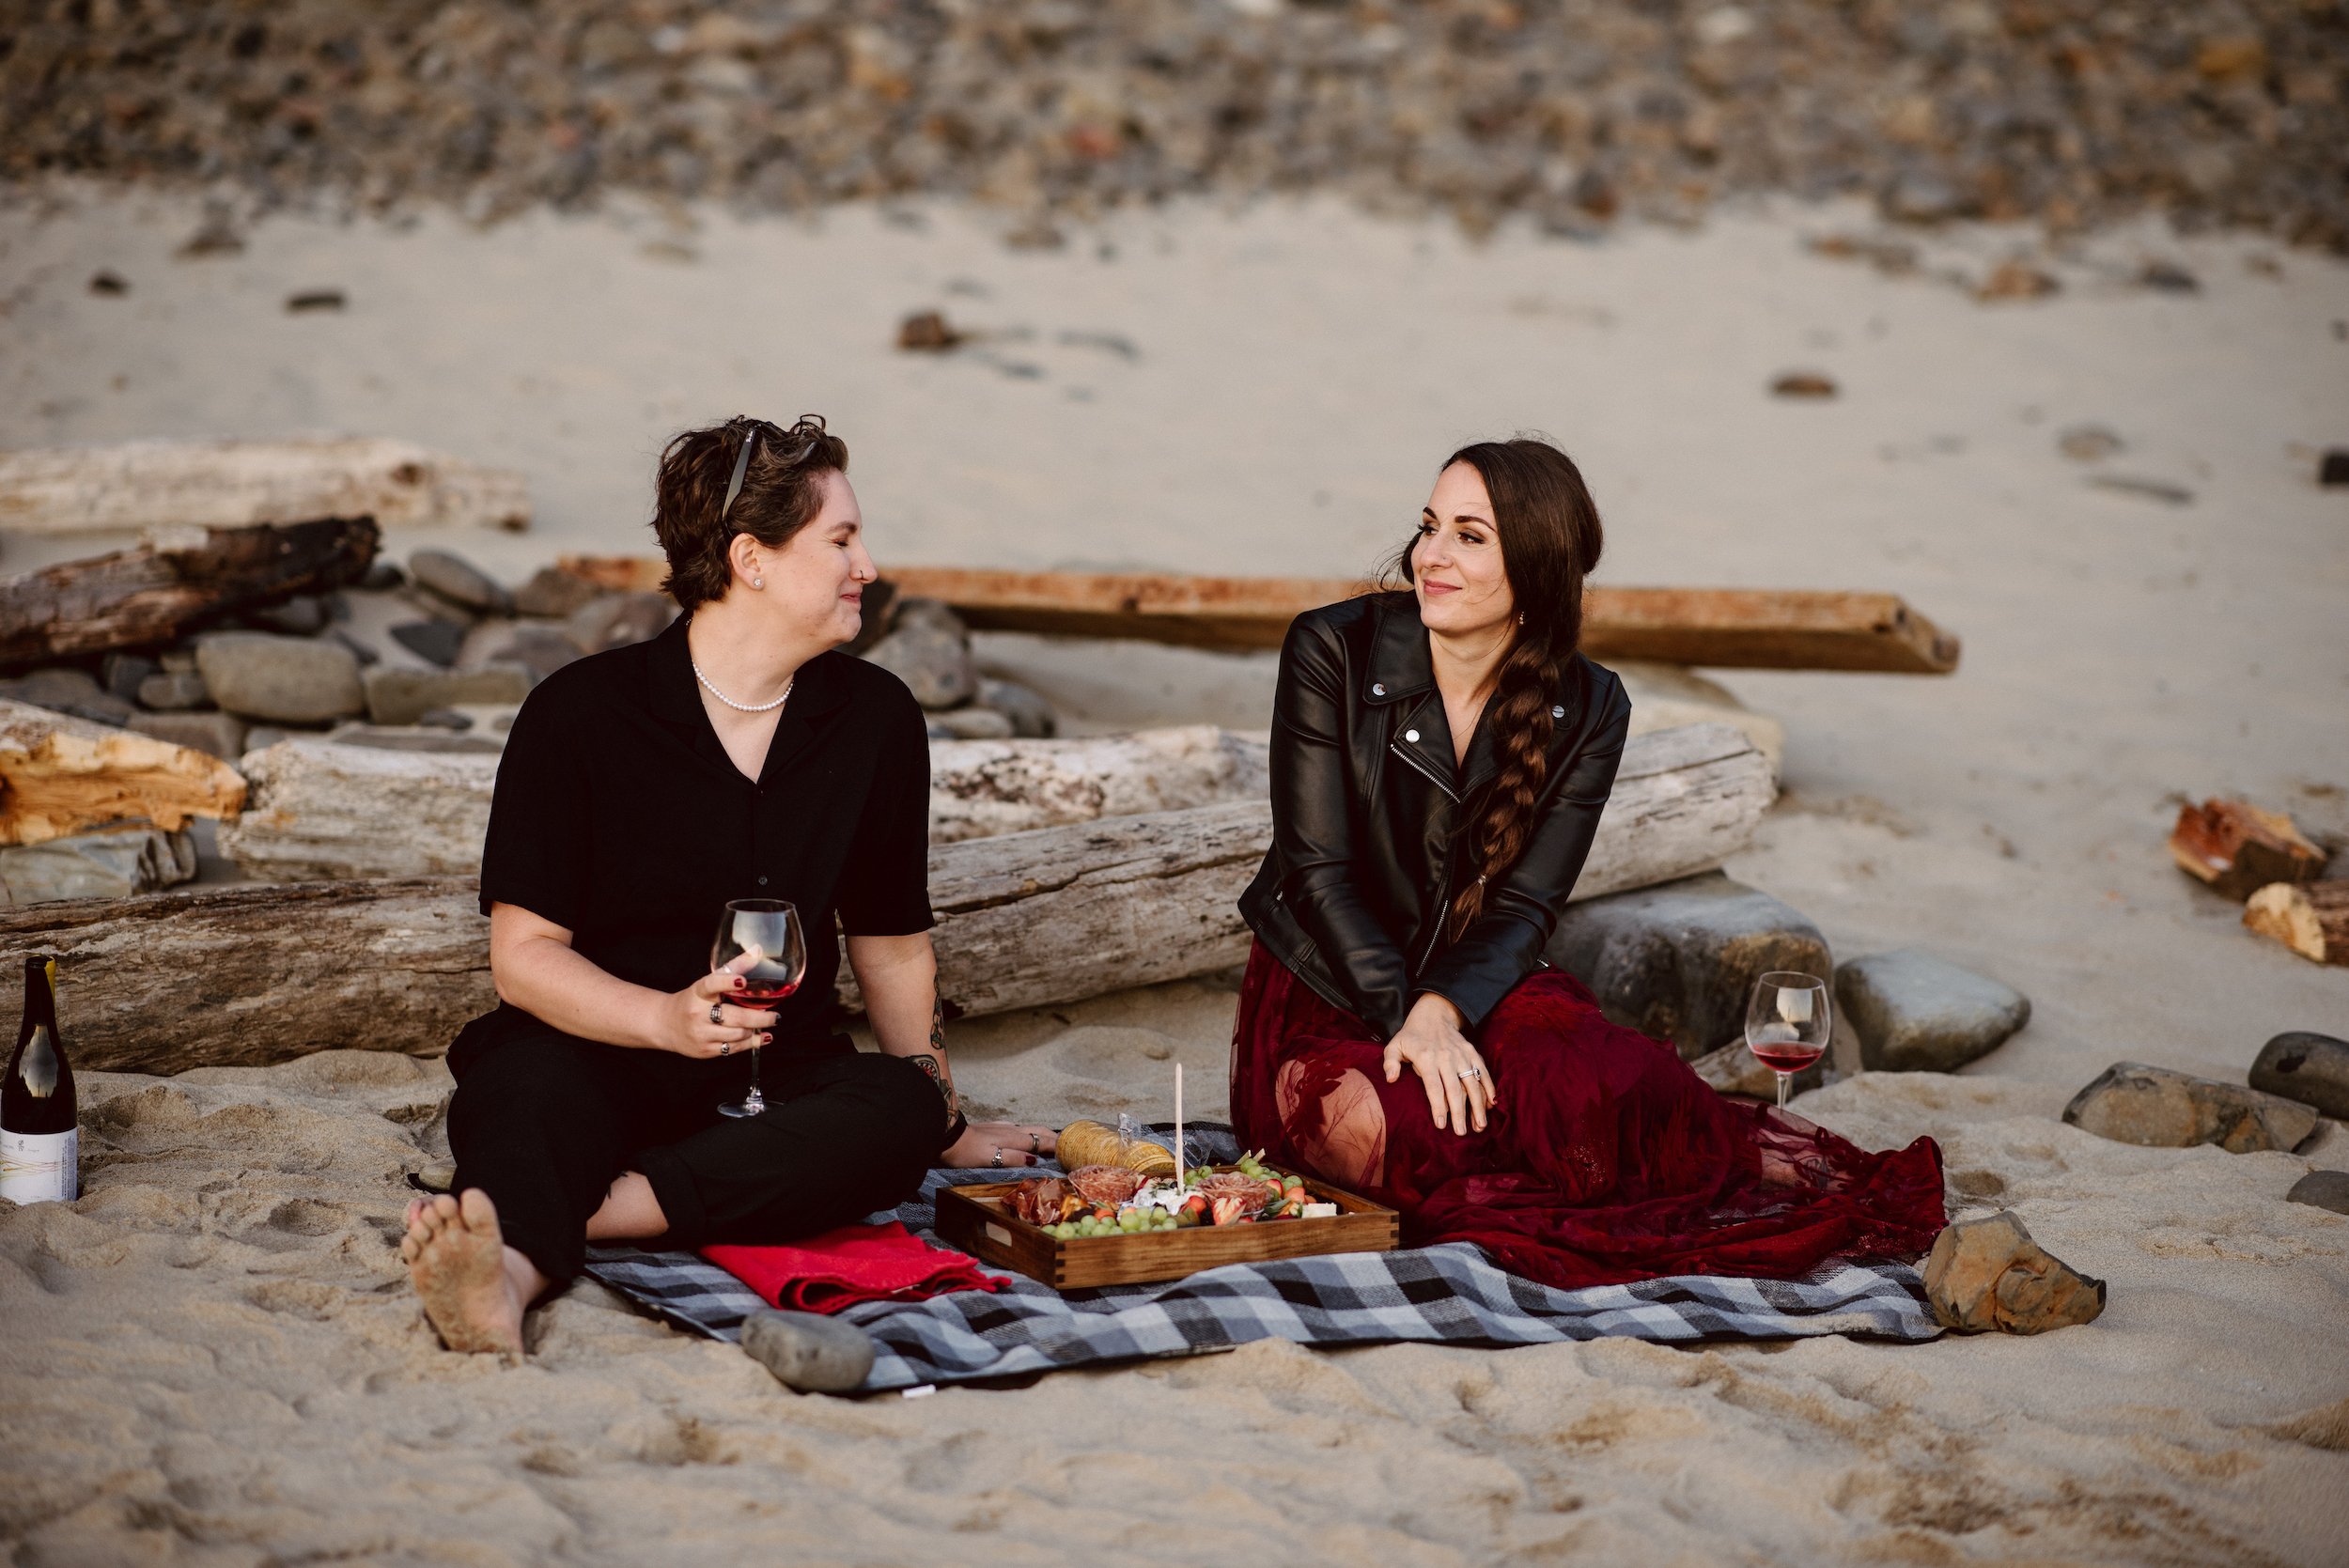 Two brides sitting on blanket on a sandy beach sharing a charcuterie board and wine and laughing together